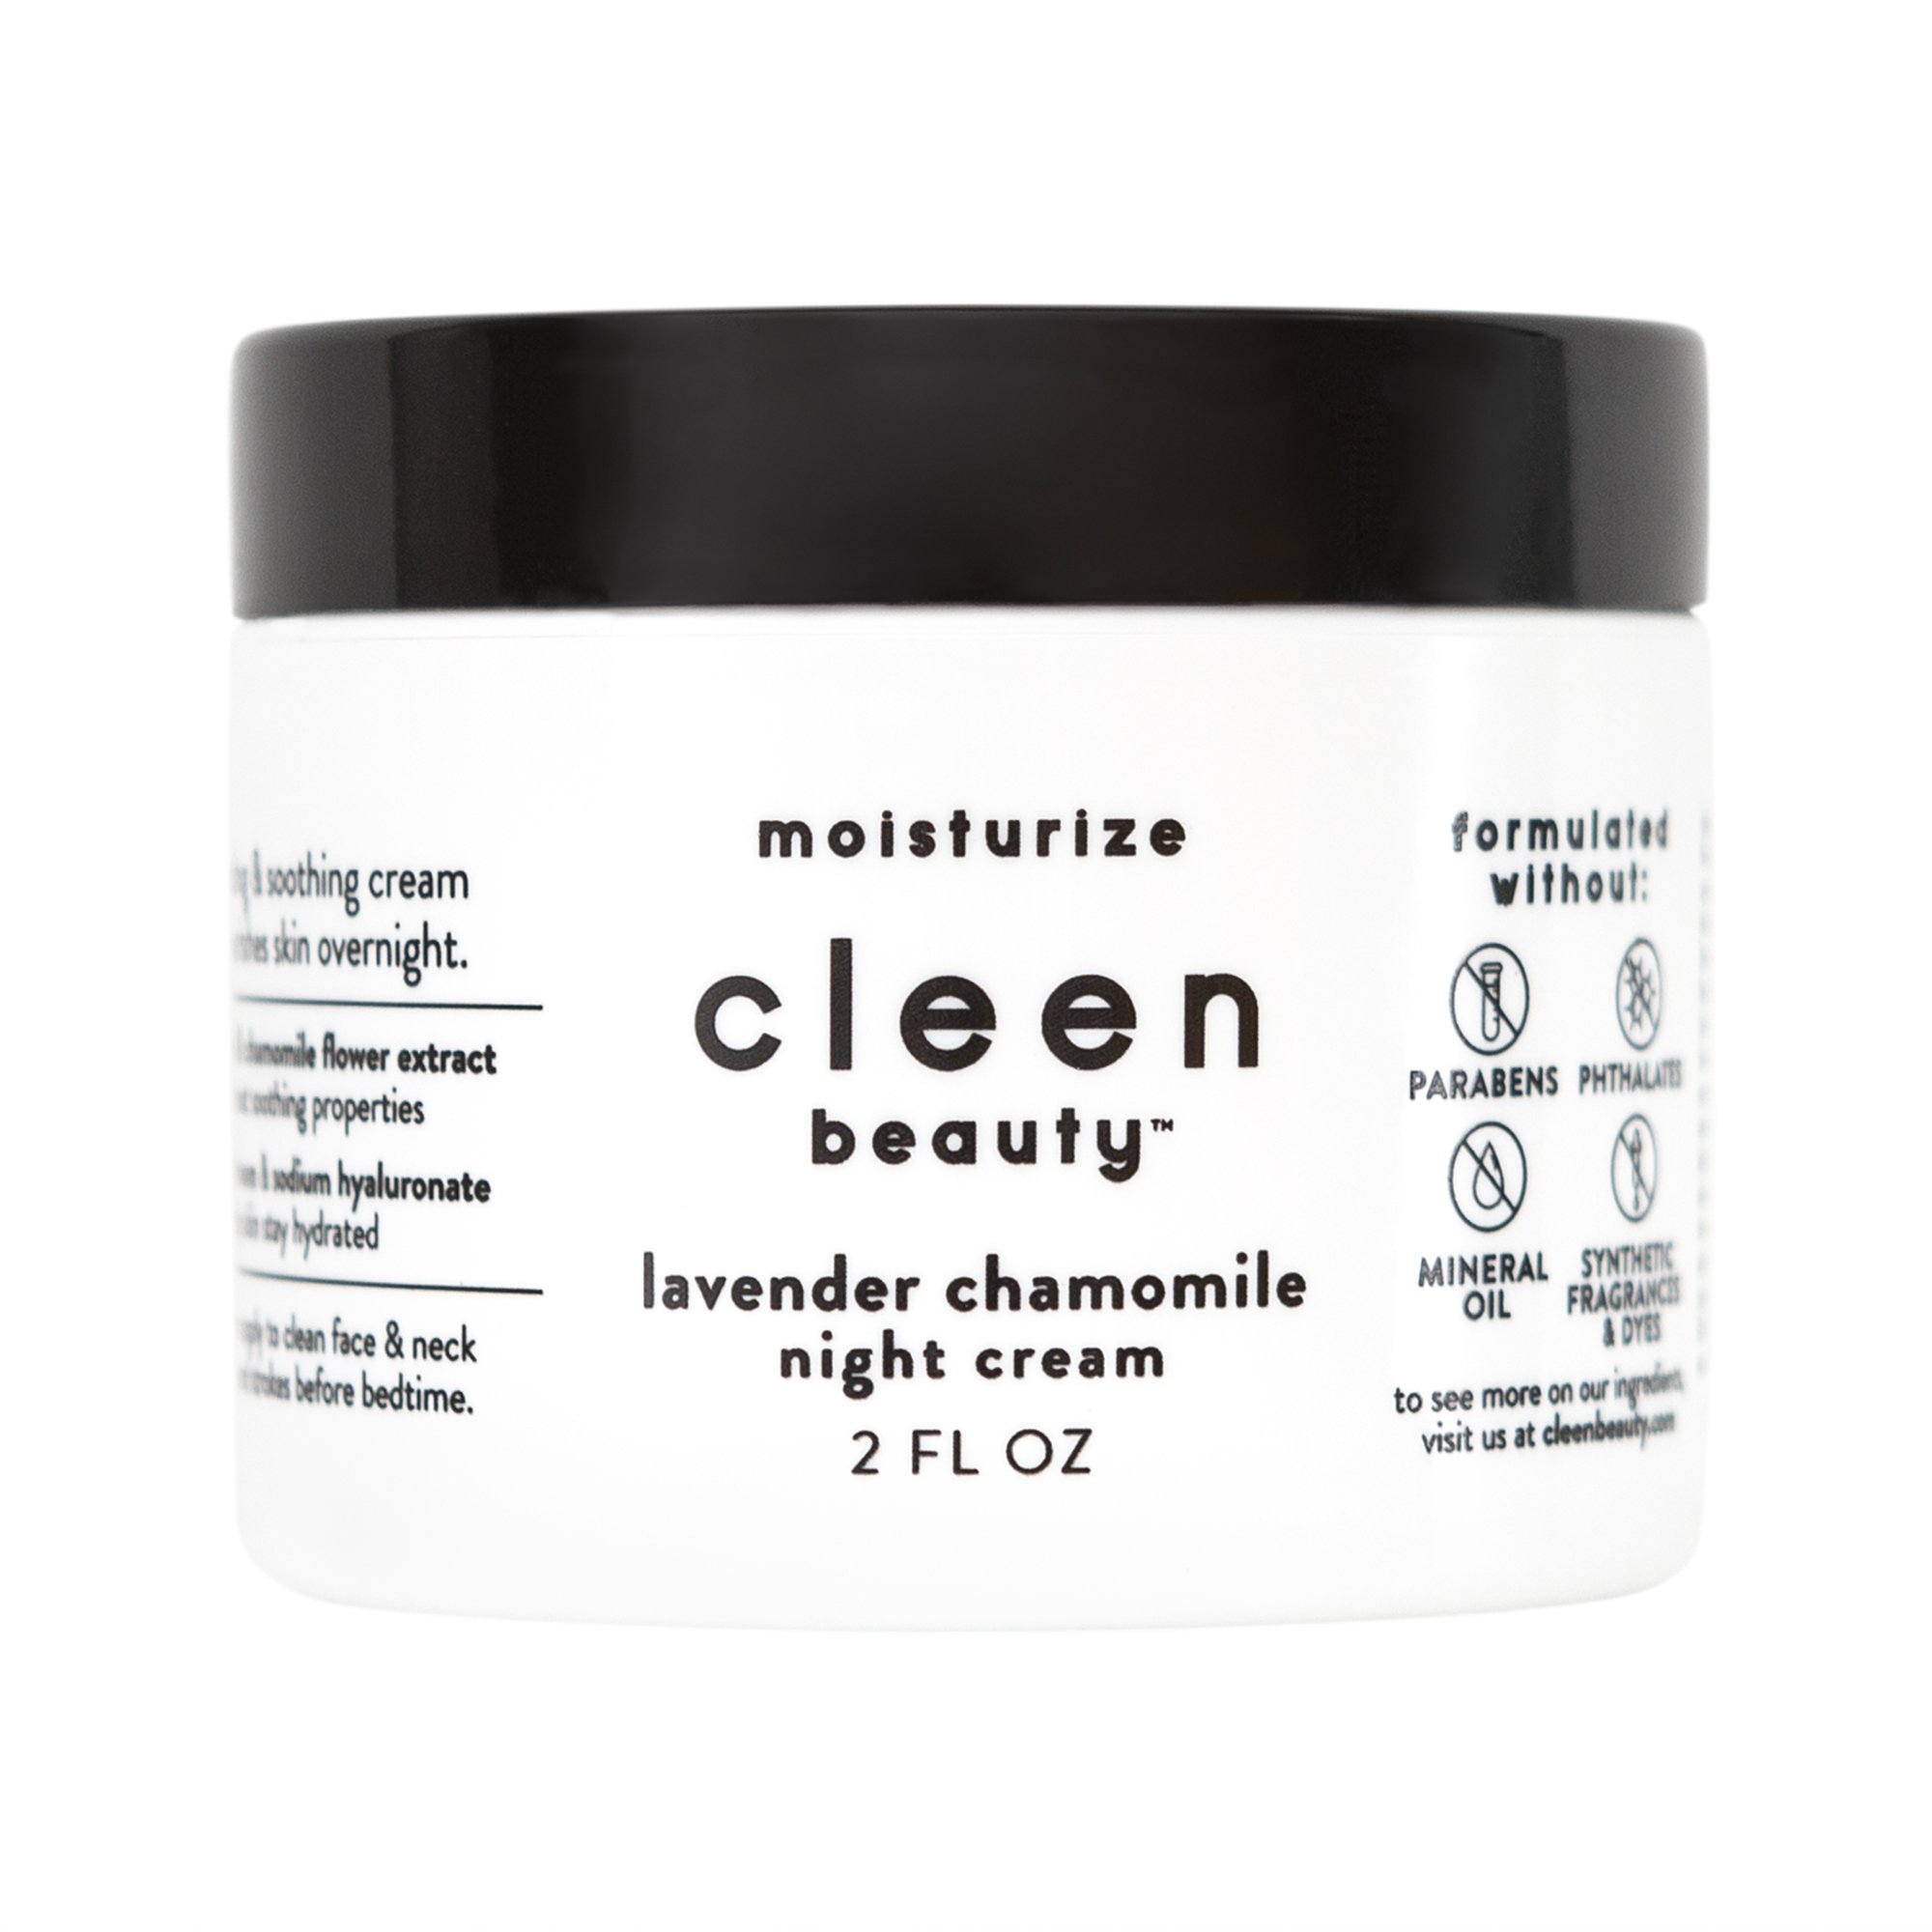 cleen beauty Night Cream with Lavender & Chamomile, 2 fl oz - image 1 of 9